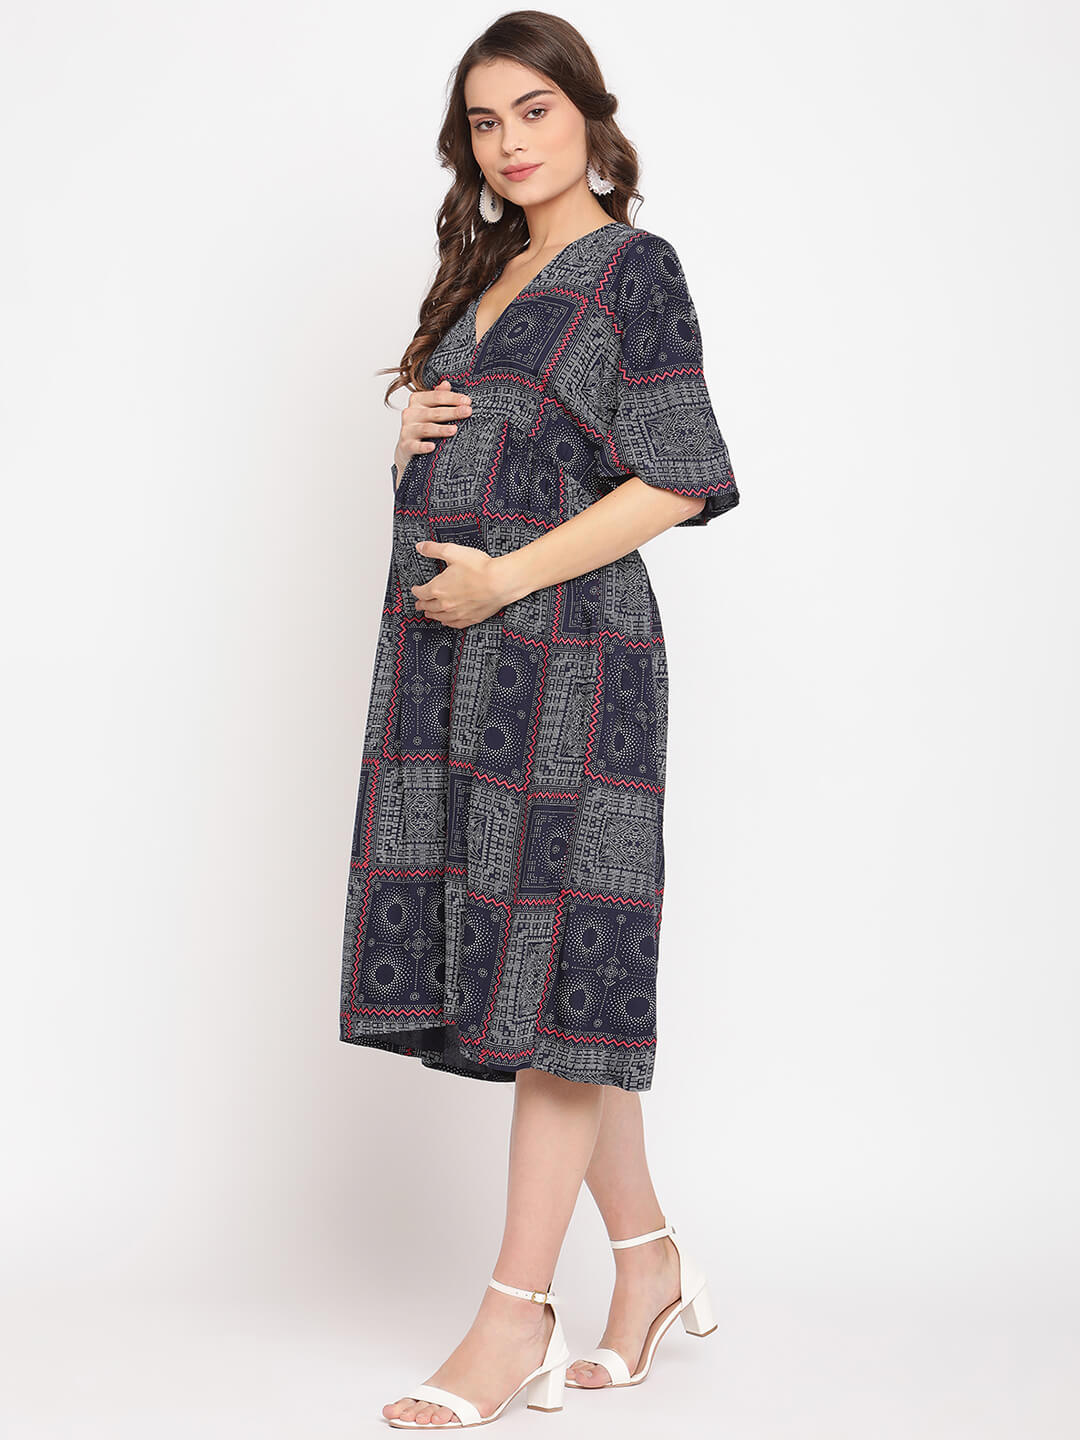 The Vanca Maternity Printed Dress With Nursing Access